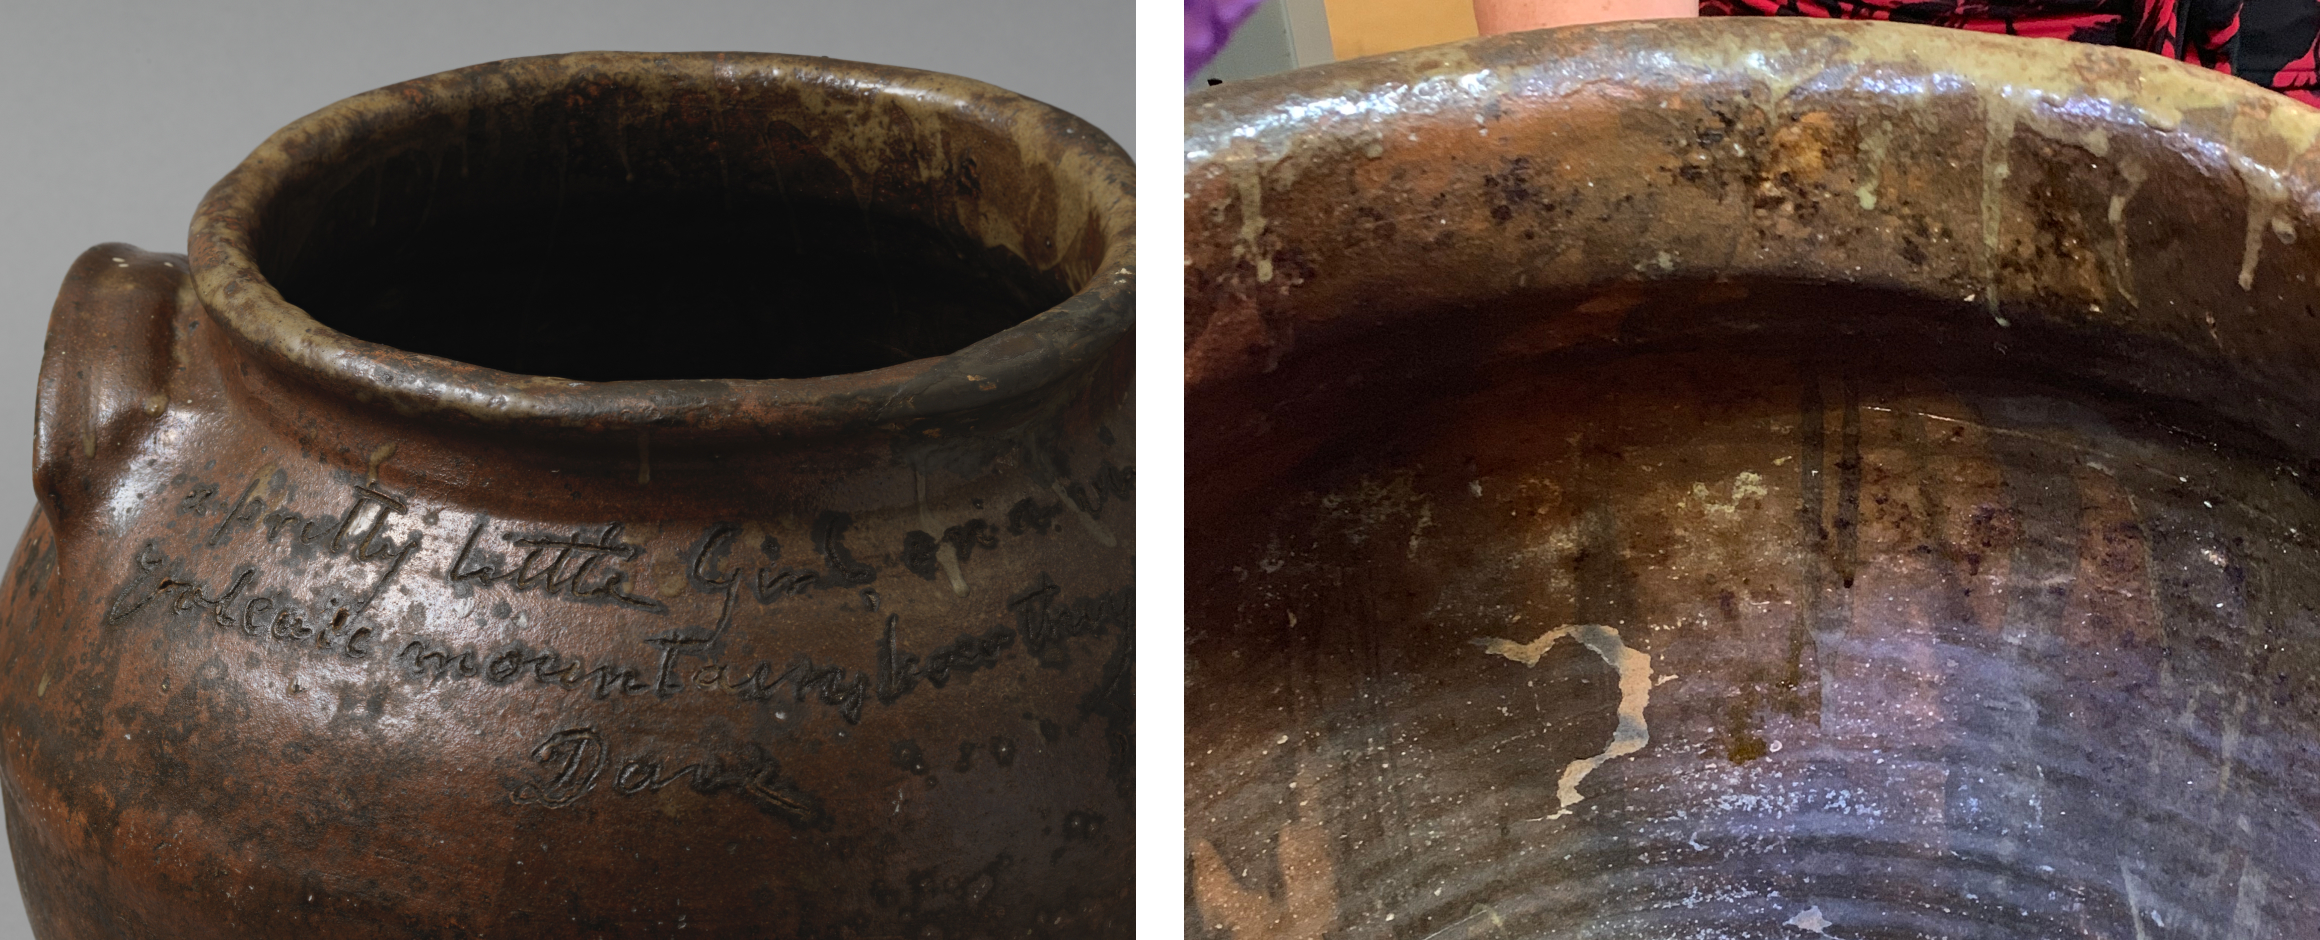 Composition image: on the left, a detail shot of a jar made by the enslaved potter Dave (later known as David Drake) with visible handwriting engraved onto the surface surrounding the edge of the jar’s opening, and on the right a detail shot of the jar’s interior with visible drip residue on the opening edges and interior walls.